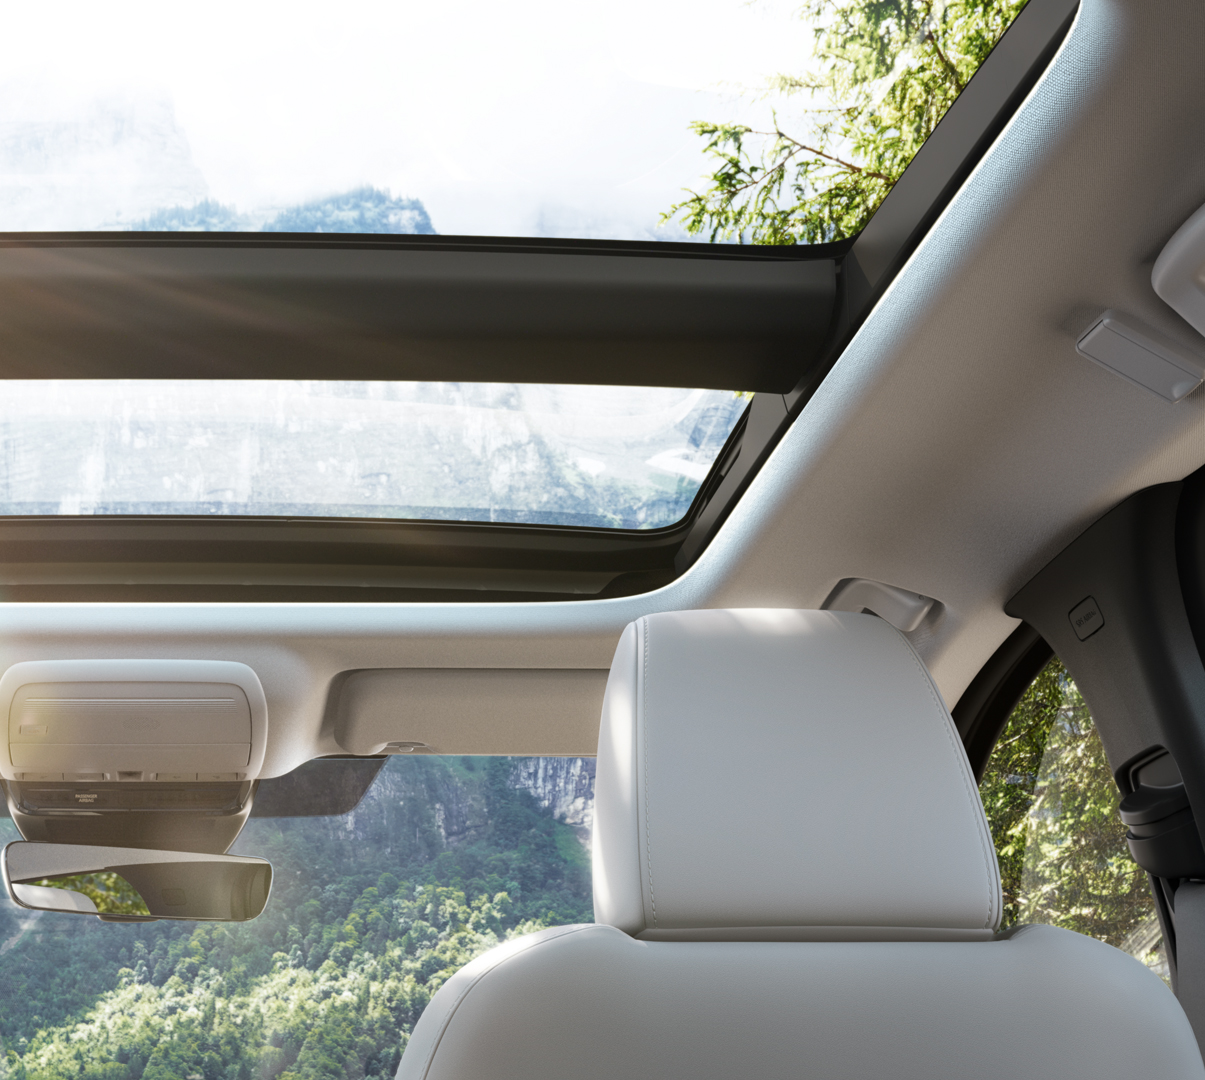 The extra-large panoramic sunroof in the CX-60 extending over both seat rows